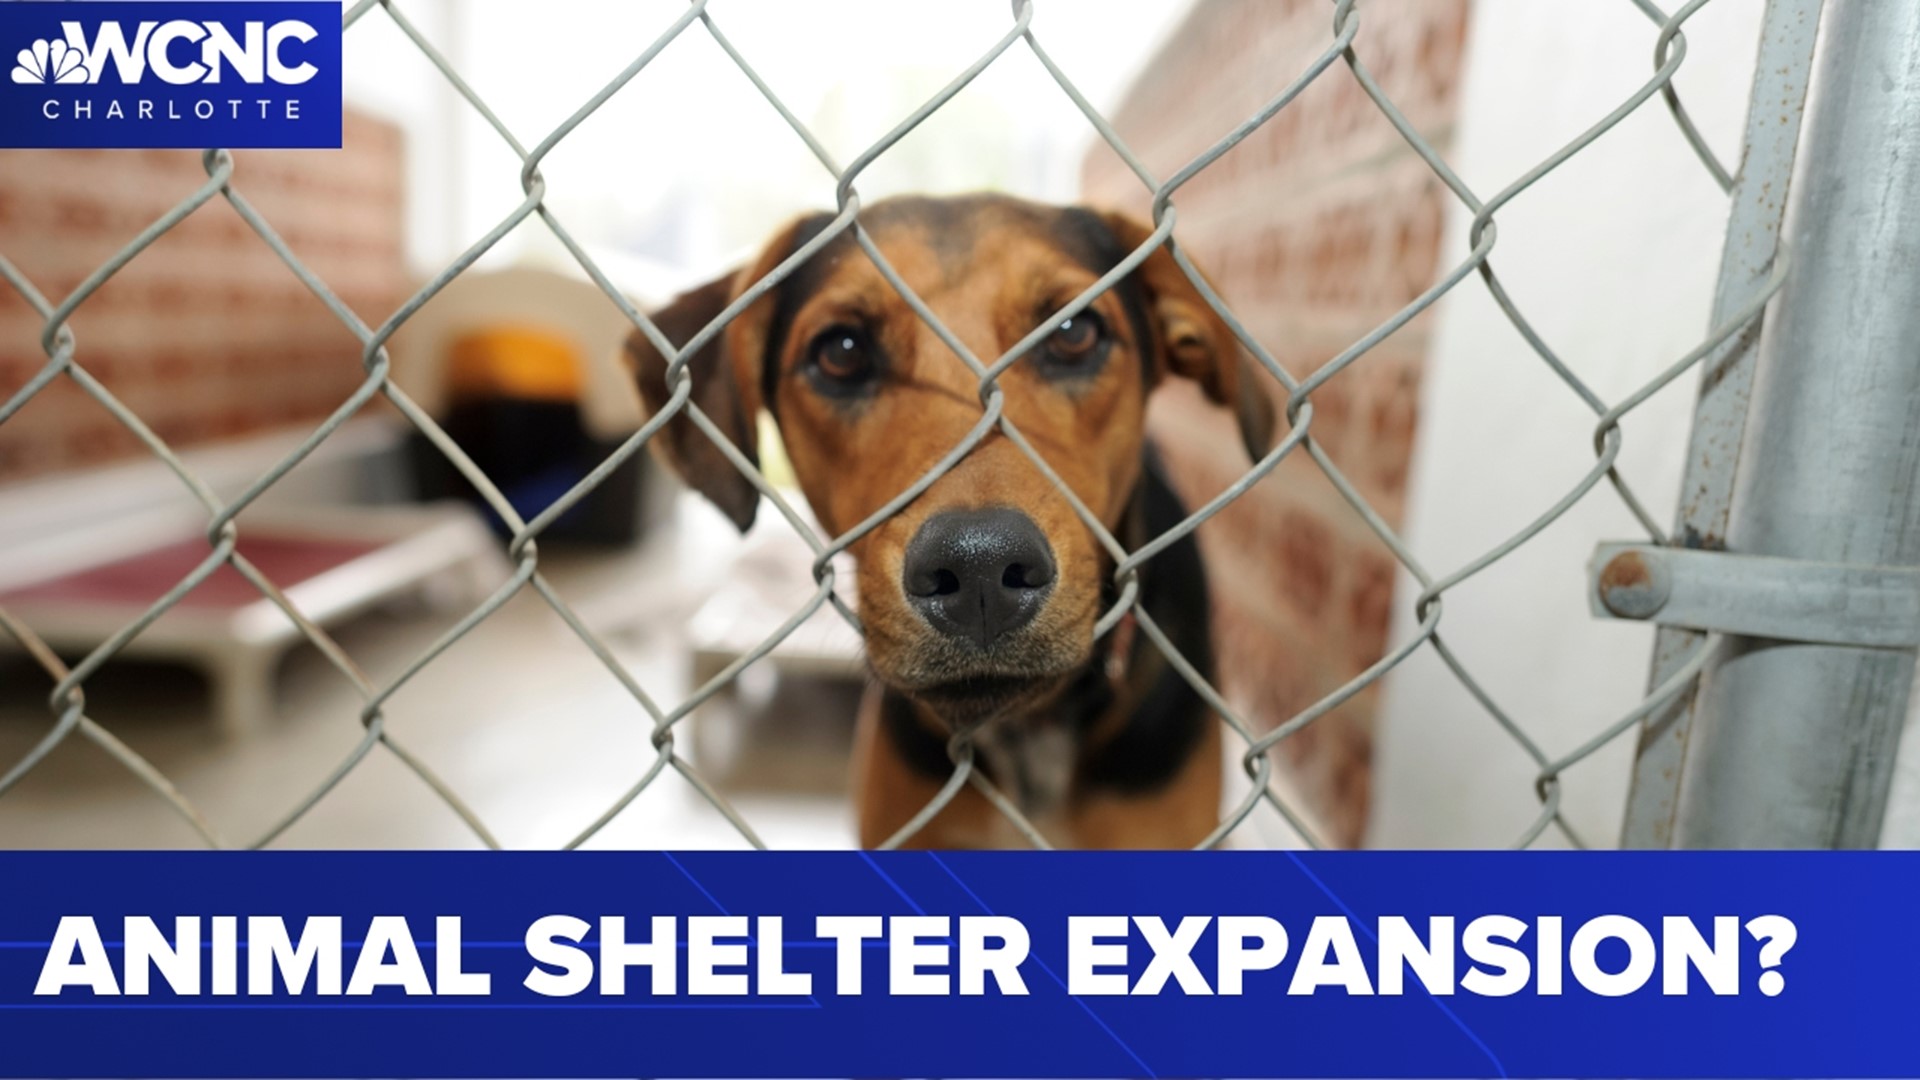 CMPD animal shelter needs expansion 